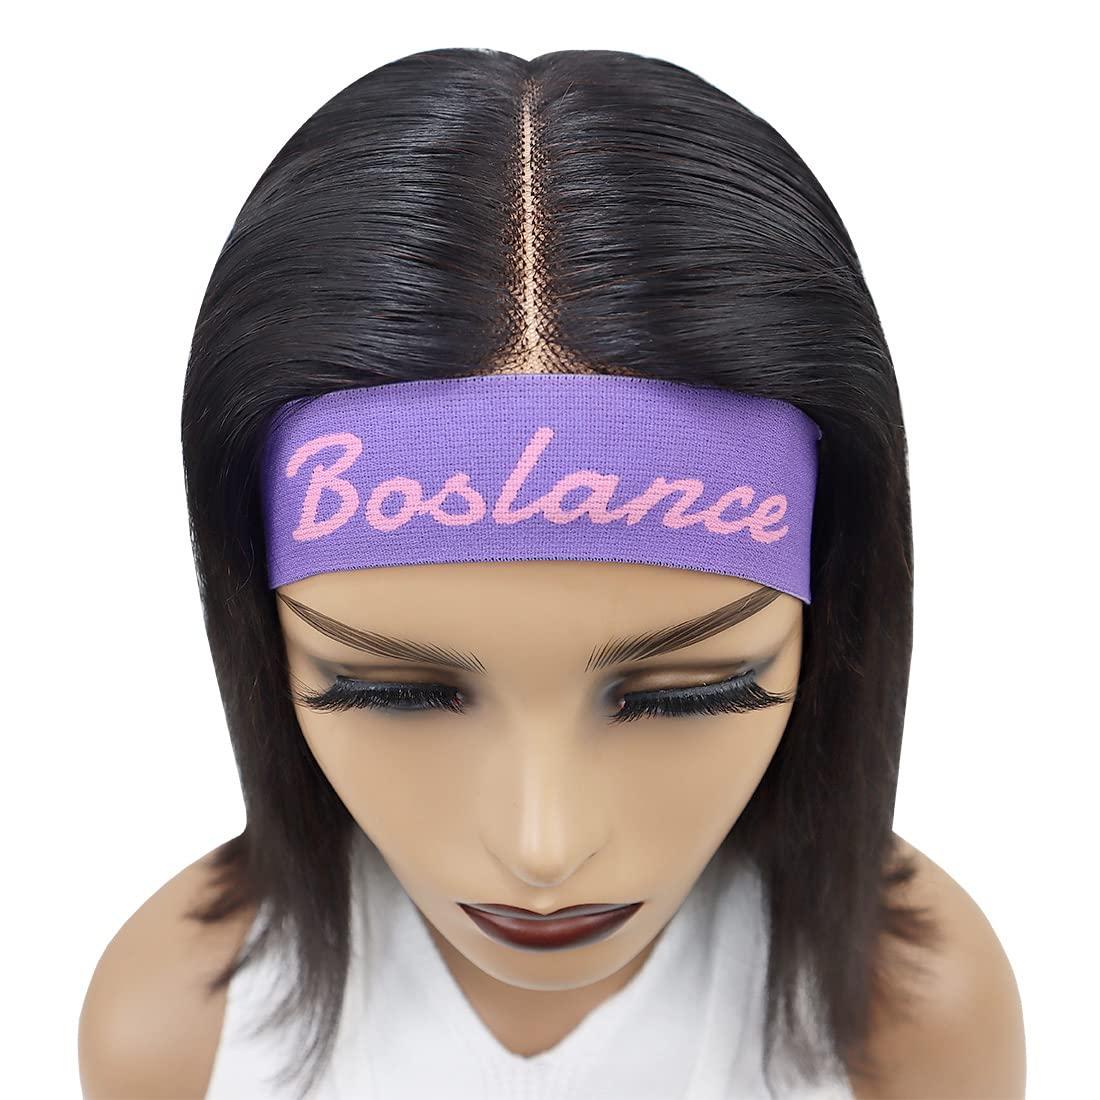  Iraatraa Wig Band Elastic Bands For Wig 6 Pcs Lace Melting  Band For Lace Front Wig Bands For Keeping Wigs In Place Edge Wrap To Lay  Edges Melt BandEdge Band